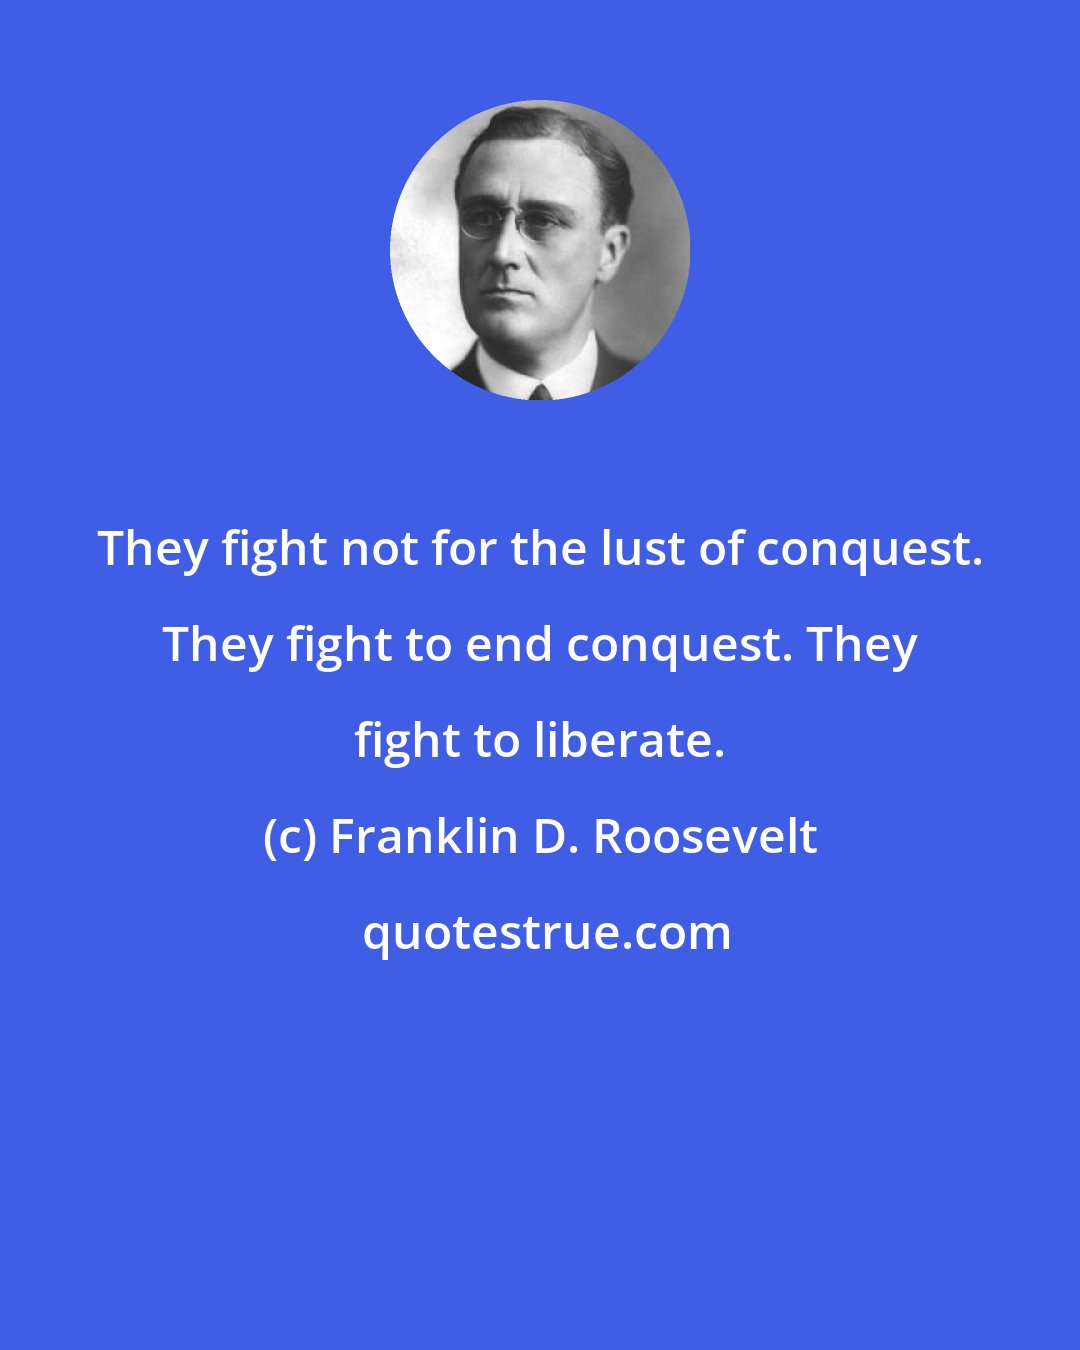 Franklin D. Roosevelt: They fight not for the lust of conquest. They fight to end conquest. They fight to liberate.